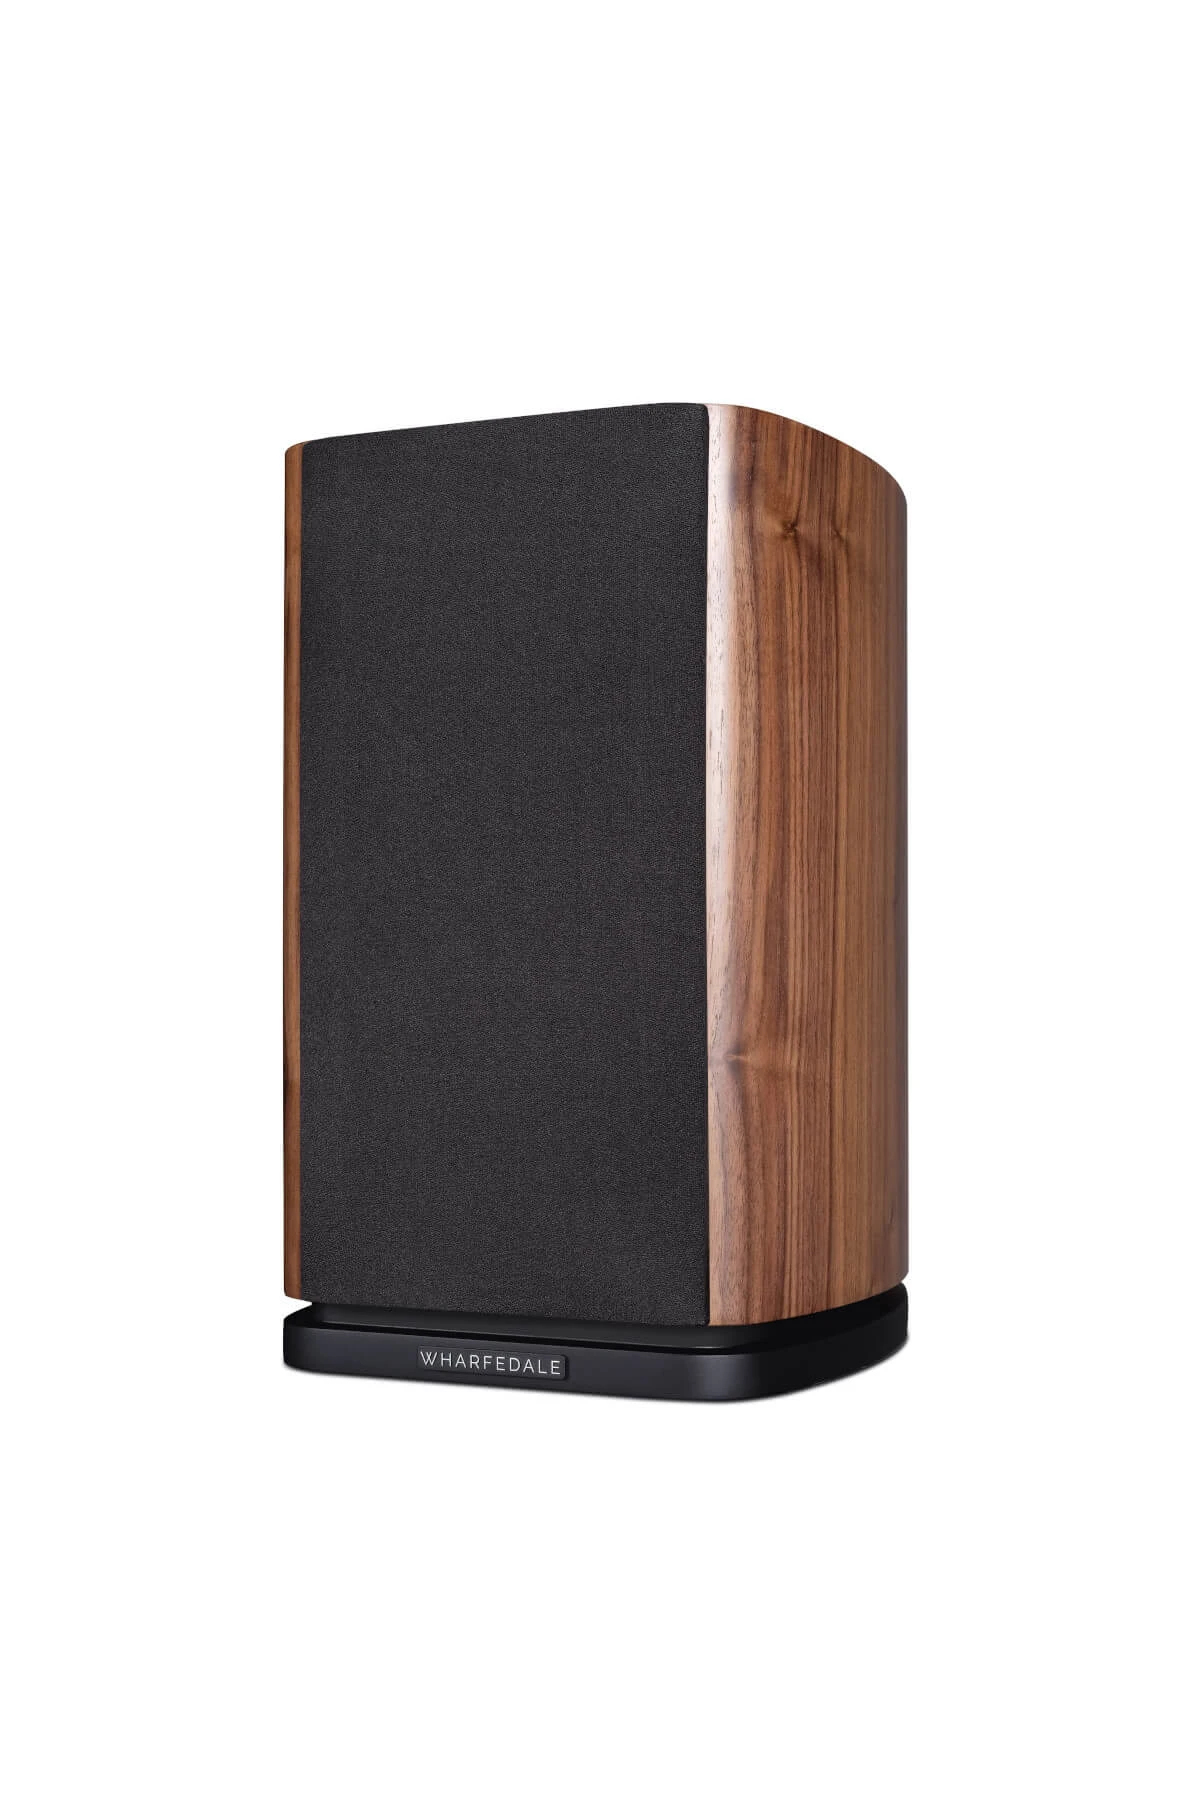 Wharfedale-Evo-4-1-walnut-front-with-grill